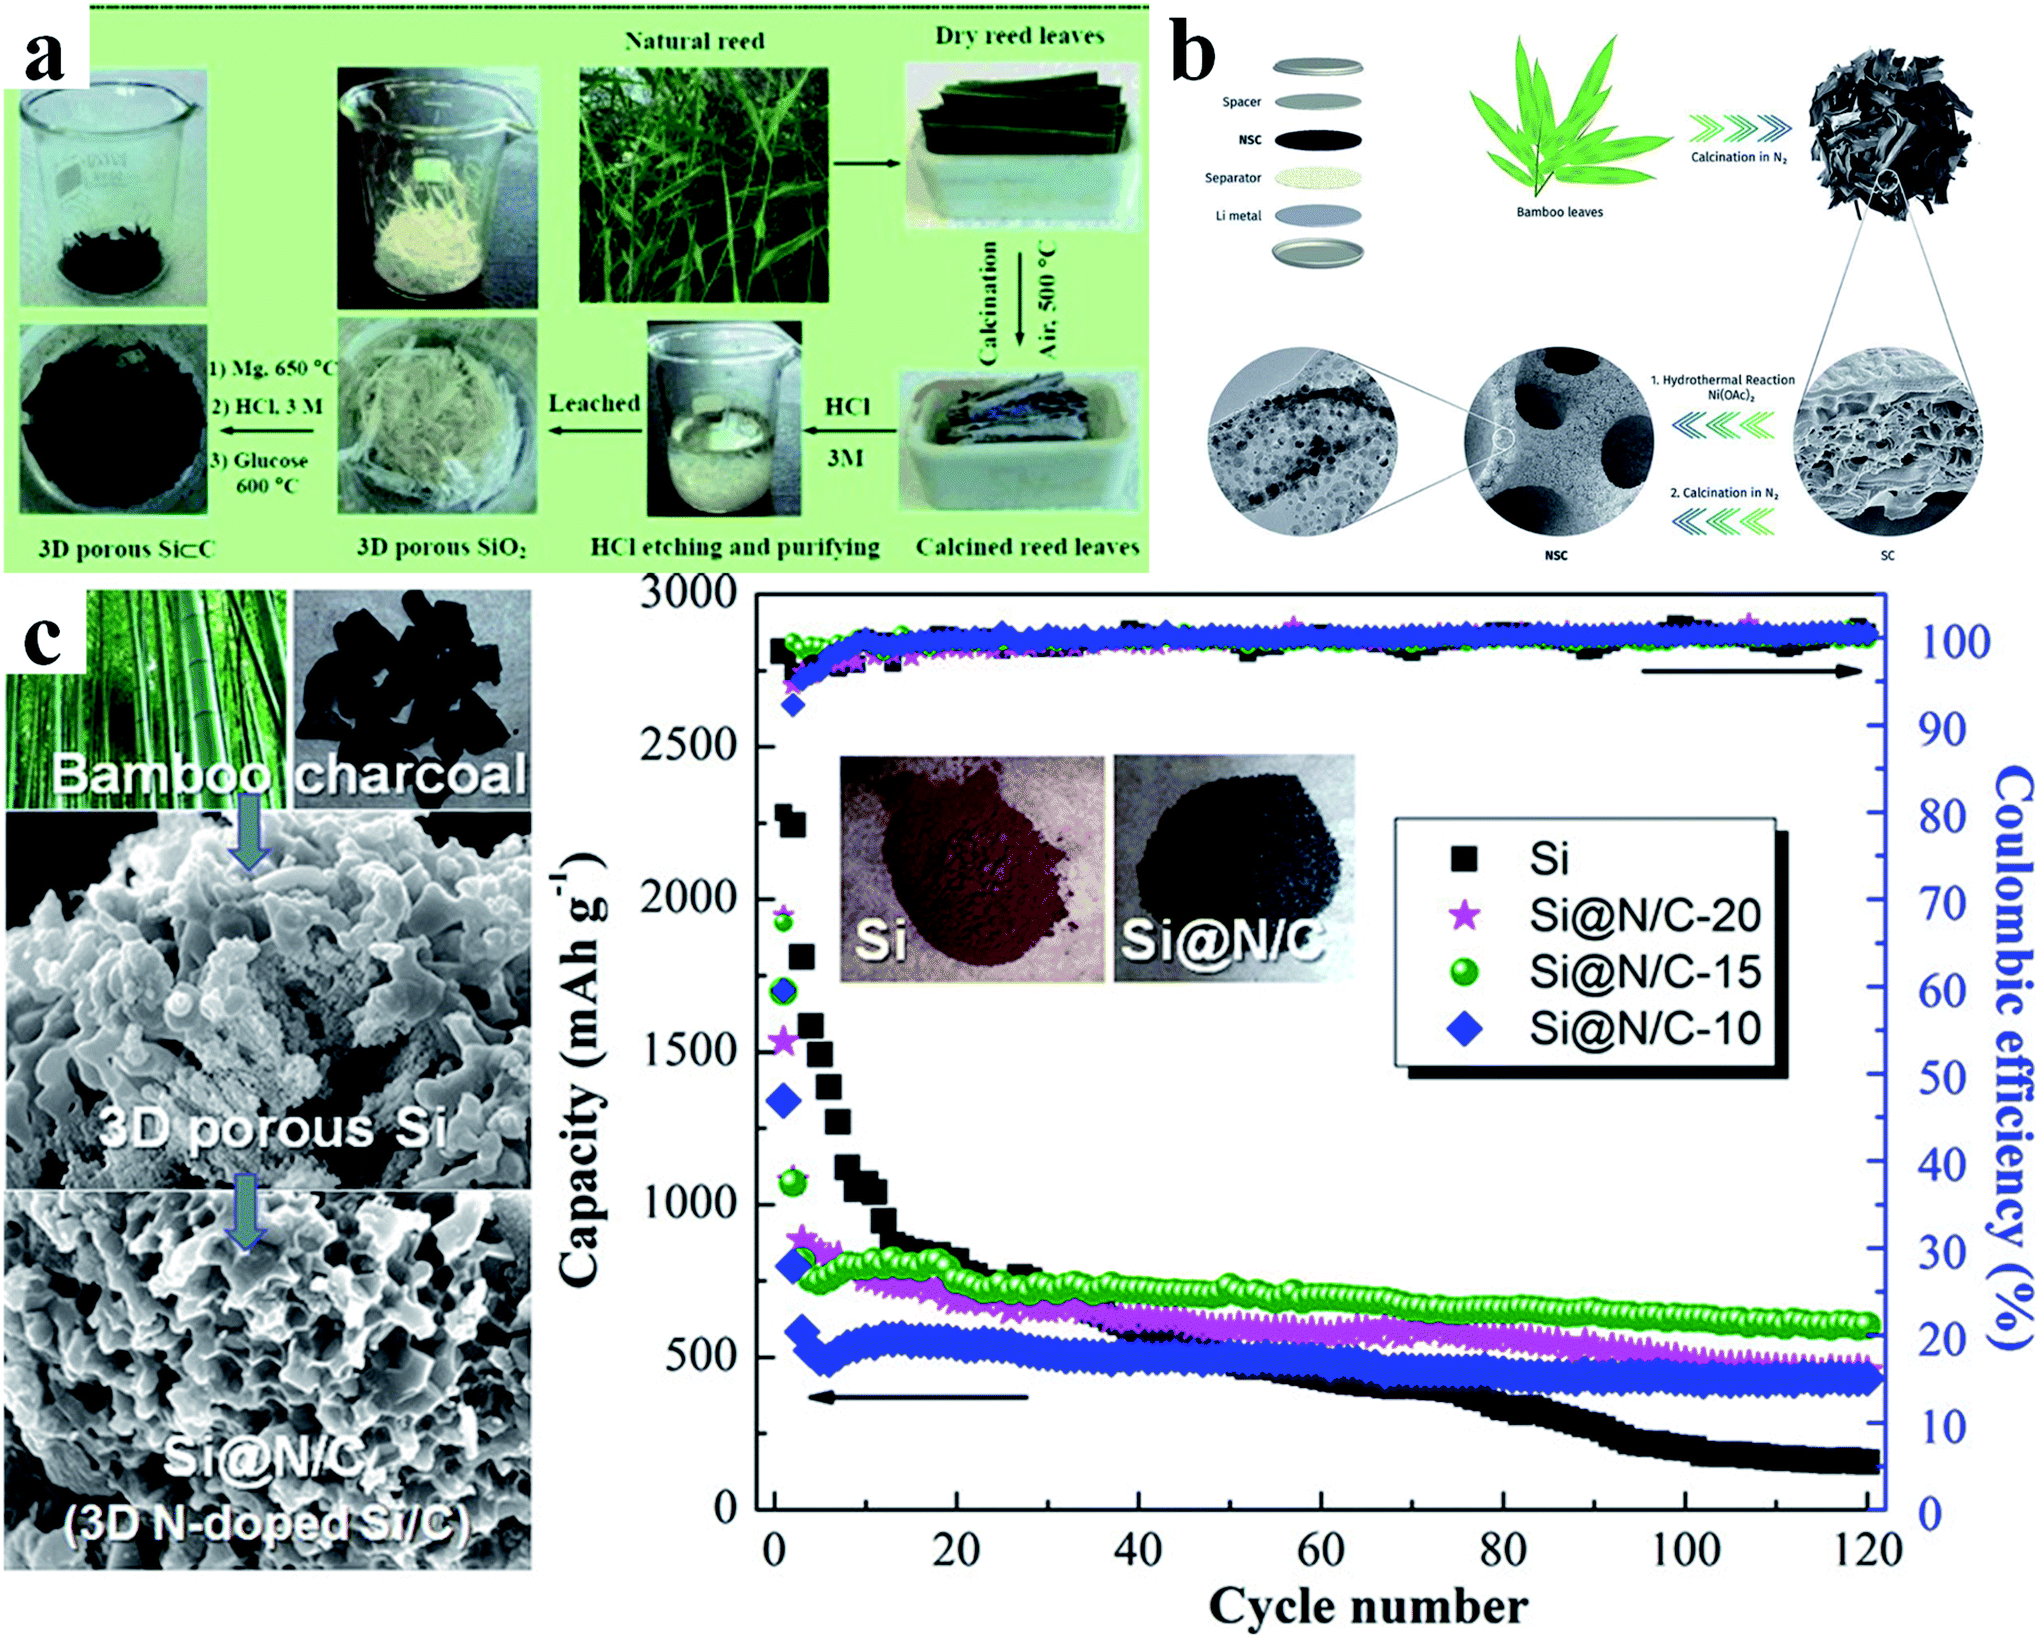 Recent progress in biomass-derived carbon materials used for secondary  batteries - Sustainable Energy & Fuels (RSC Publishing)  DOI:10.1039/D1SE00265A